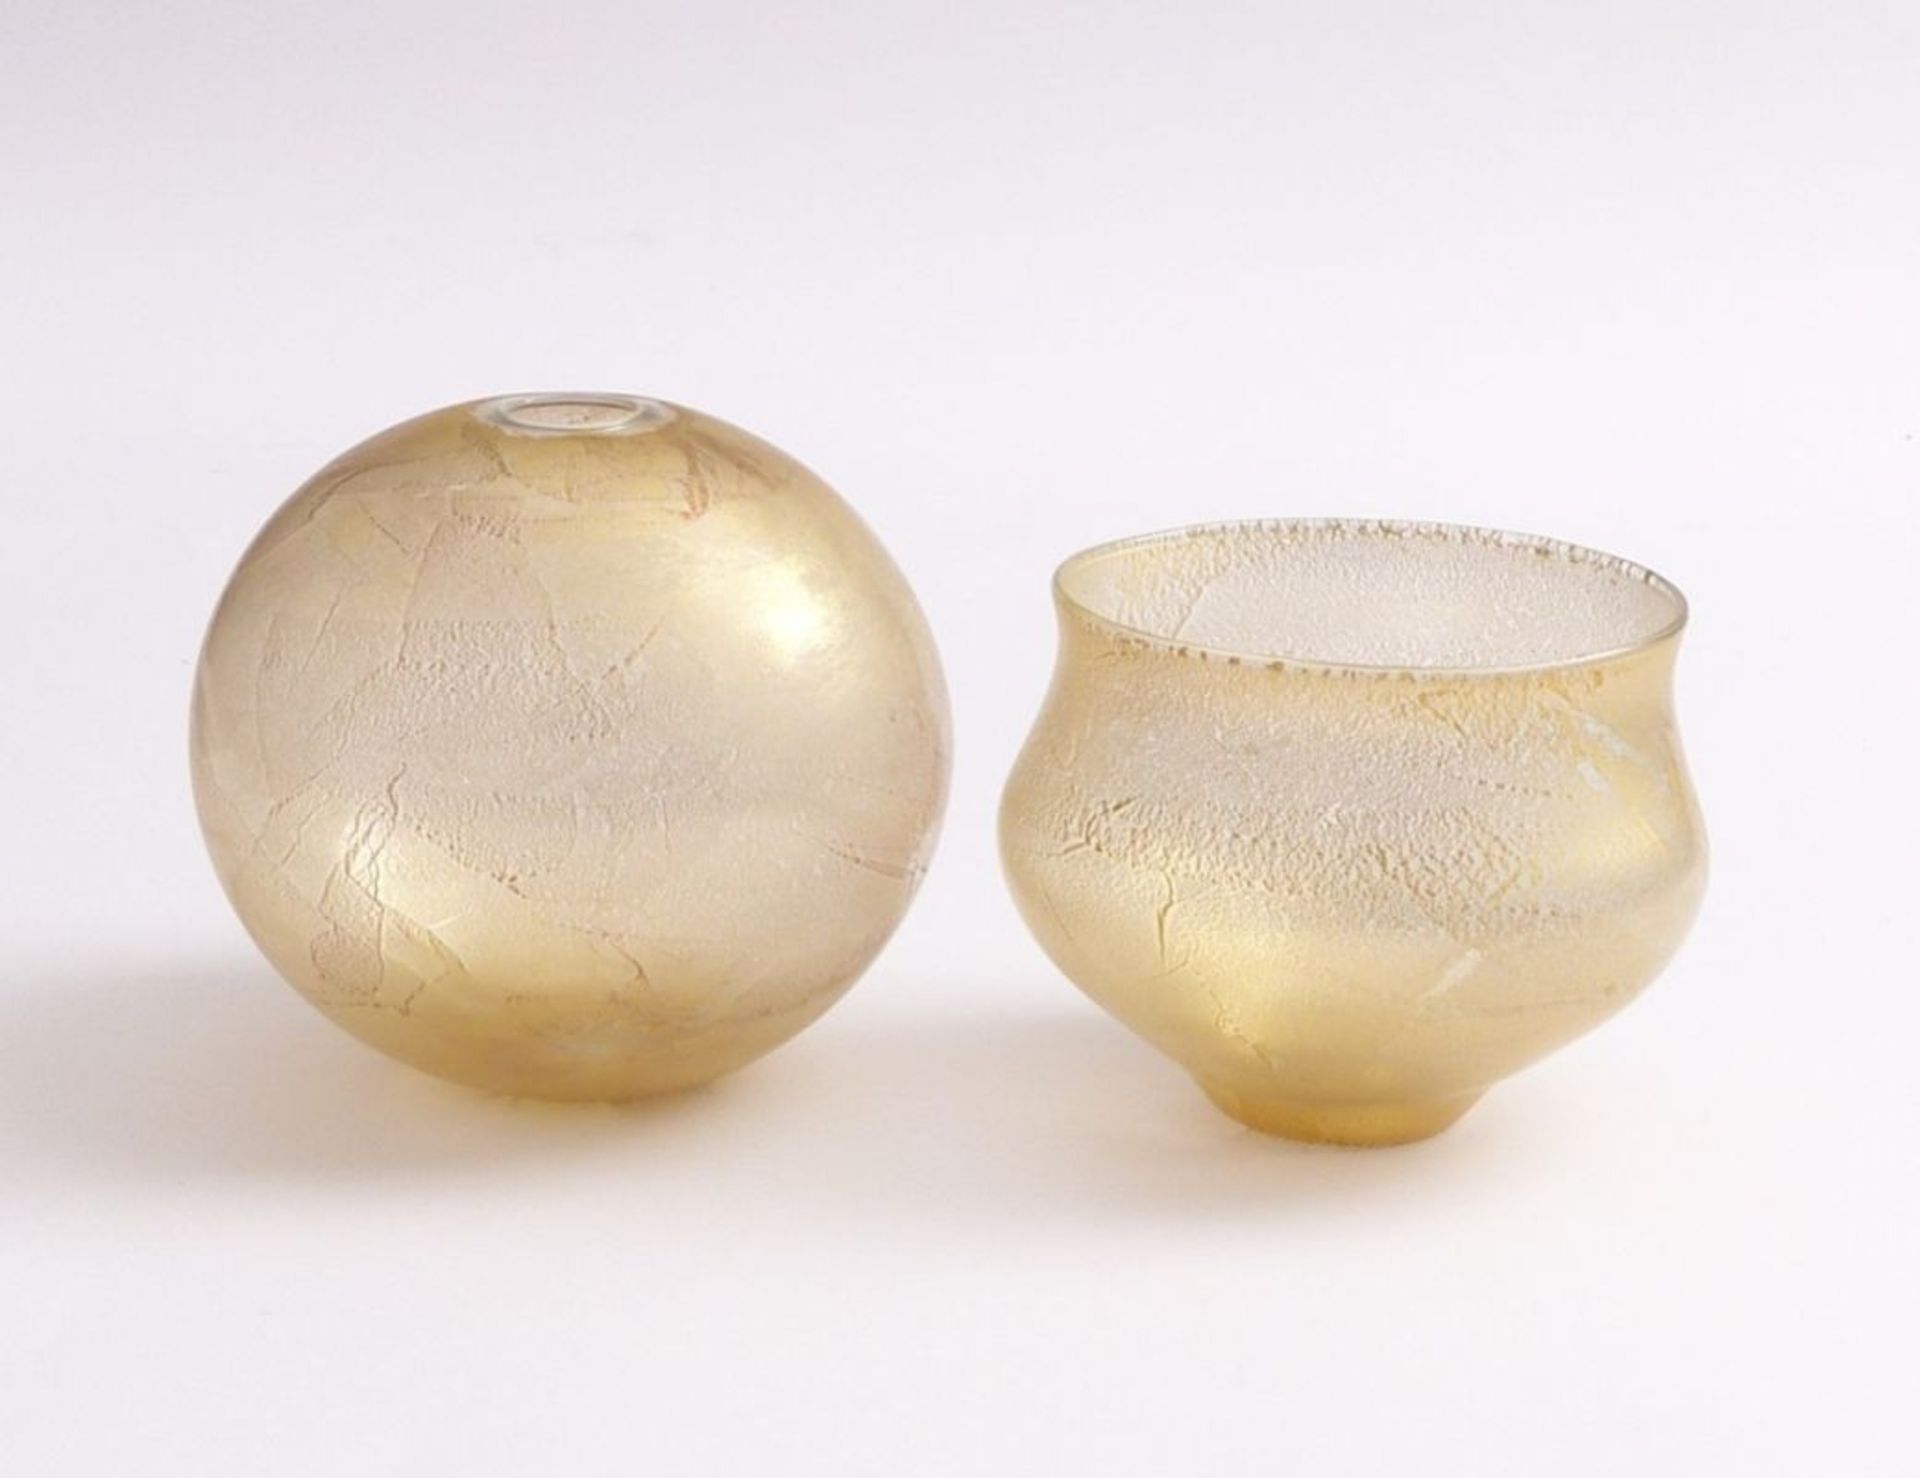 Schindhelm, Otto (attrib.)Bowl and ball vase(Lauscha 1920 born) Colorless glass with inclusions of - Image 2 of 2